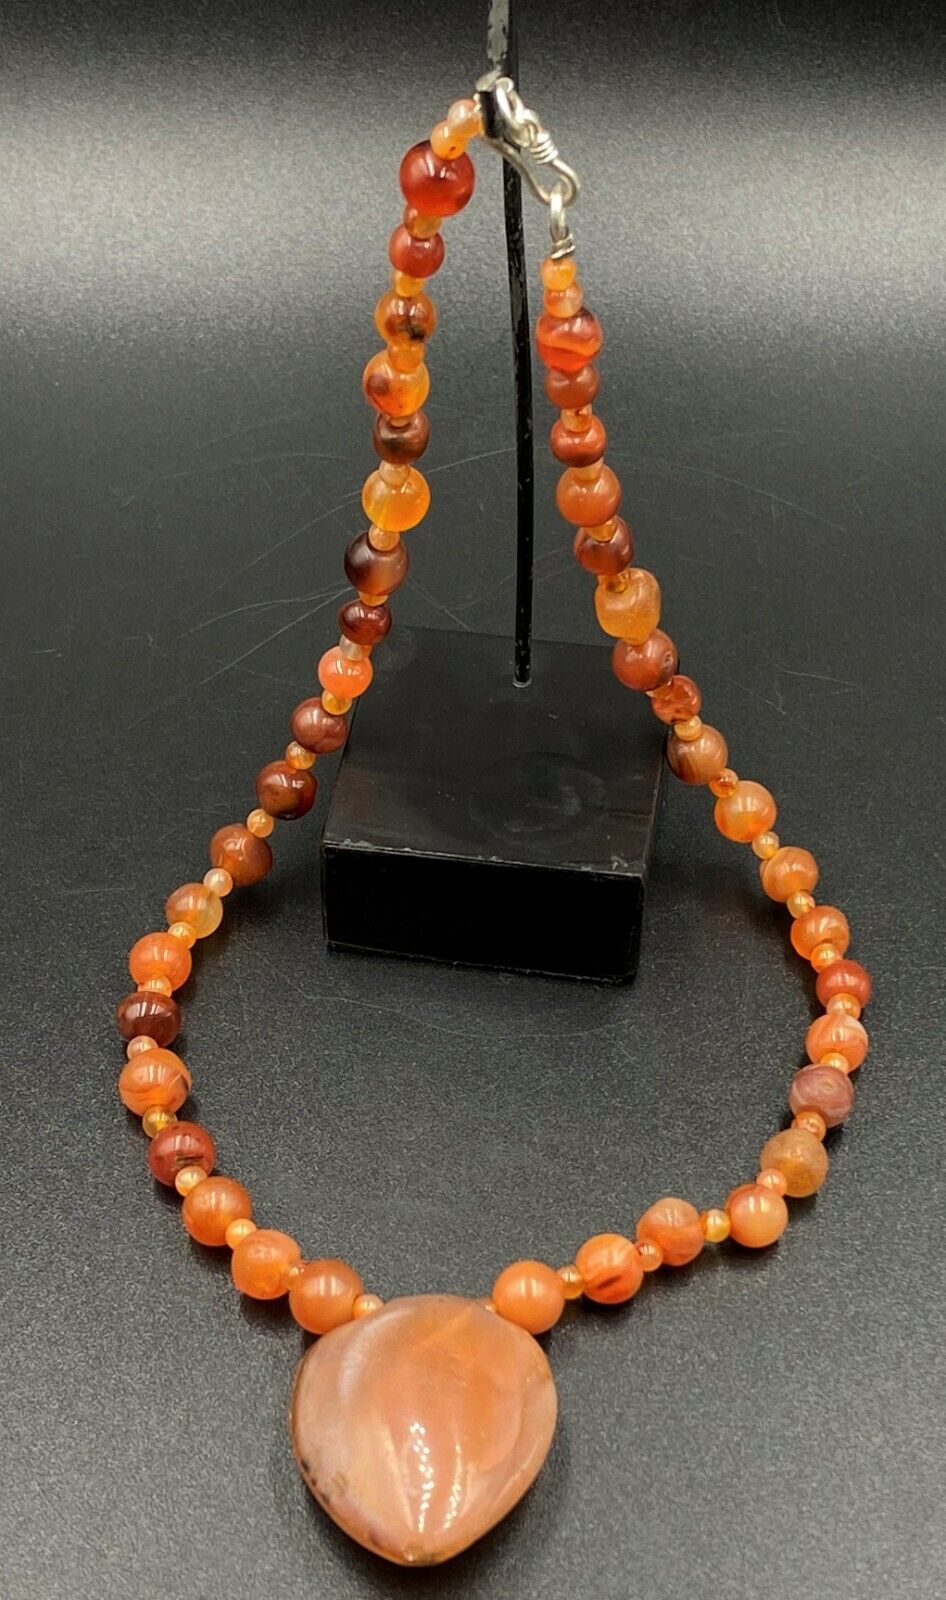 Vintage Antique Nepalese Himalayan Antiquities Carnelian Jewelry Beads Necklace